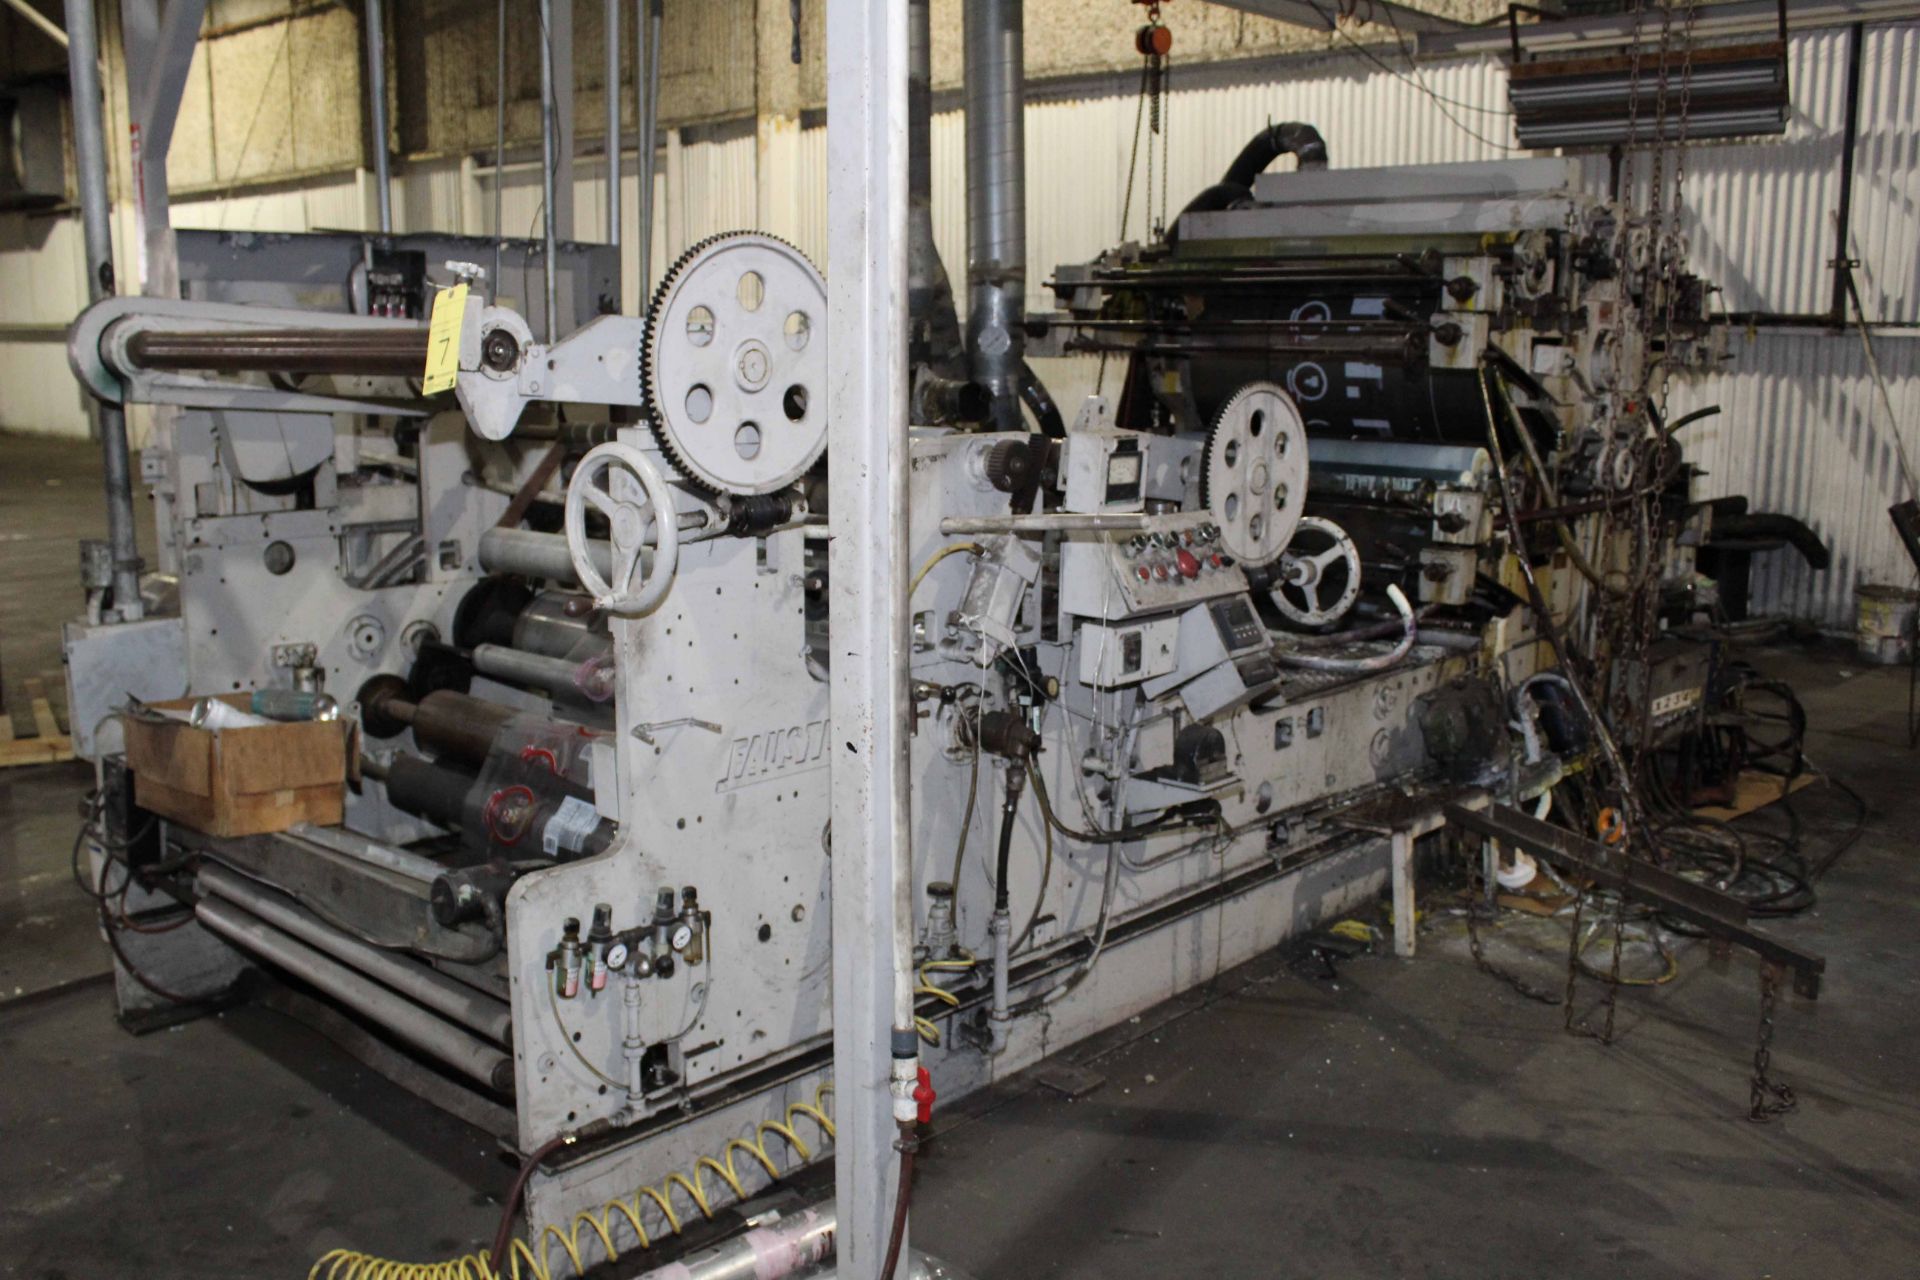 CI FLEXOGRAPHIC PRINTING PRESS, FAUSTEL MDL. E41-II, 44"W. cap., 4-color, fume exhaust blower - Image 2 of 7